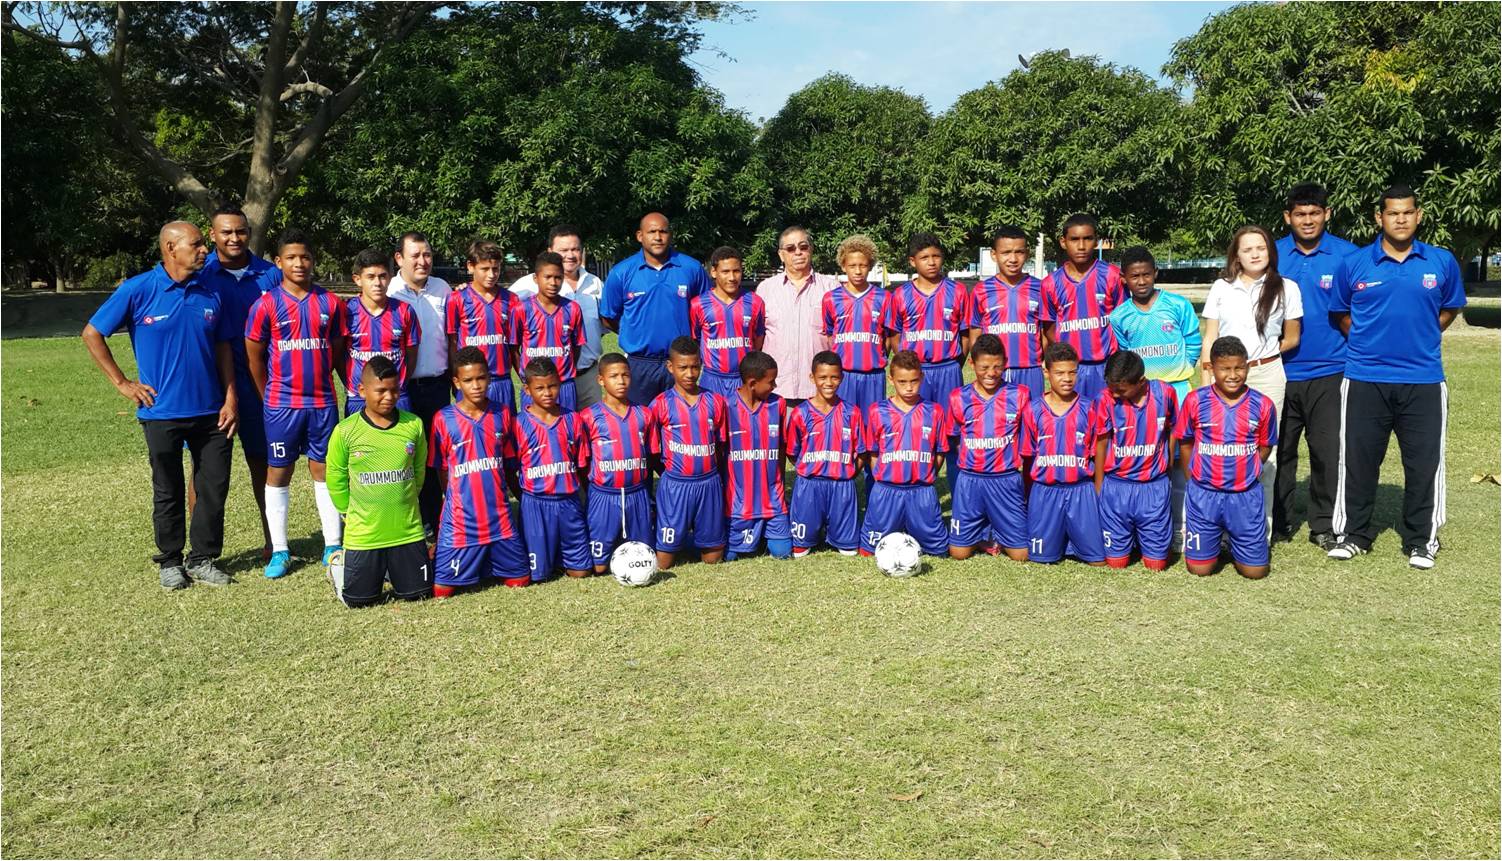 The Magdalena Children’s Soccer Team is wearing the competition uniforms donated by Drummond Ltd. 